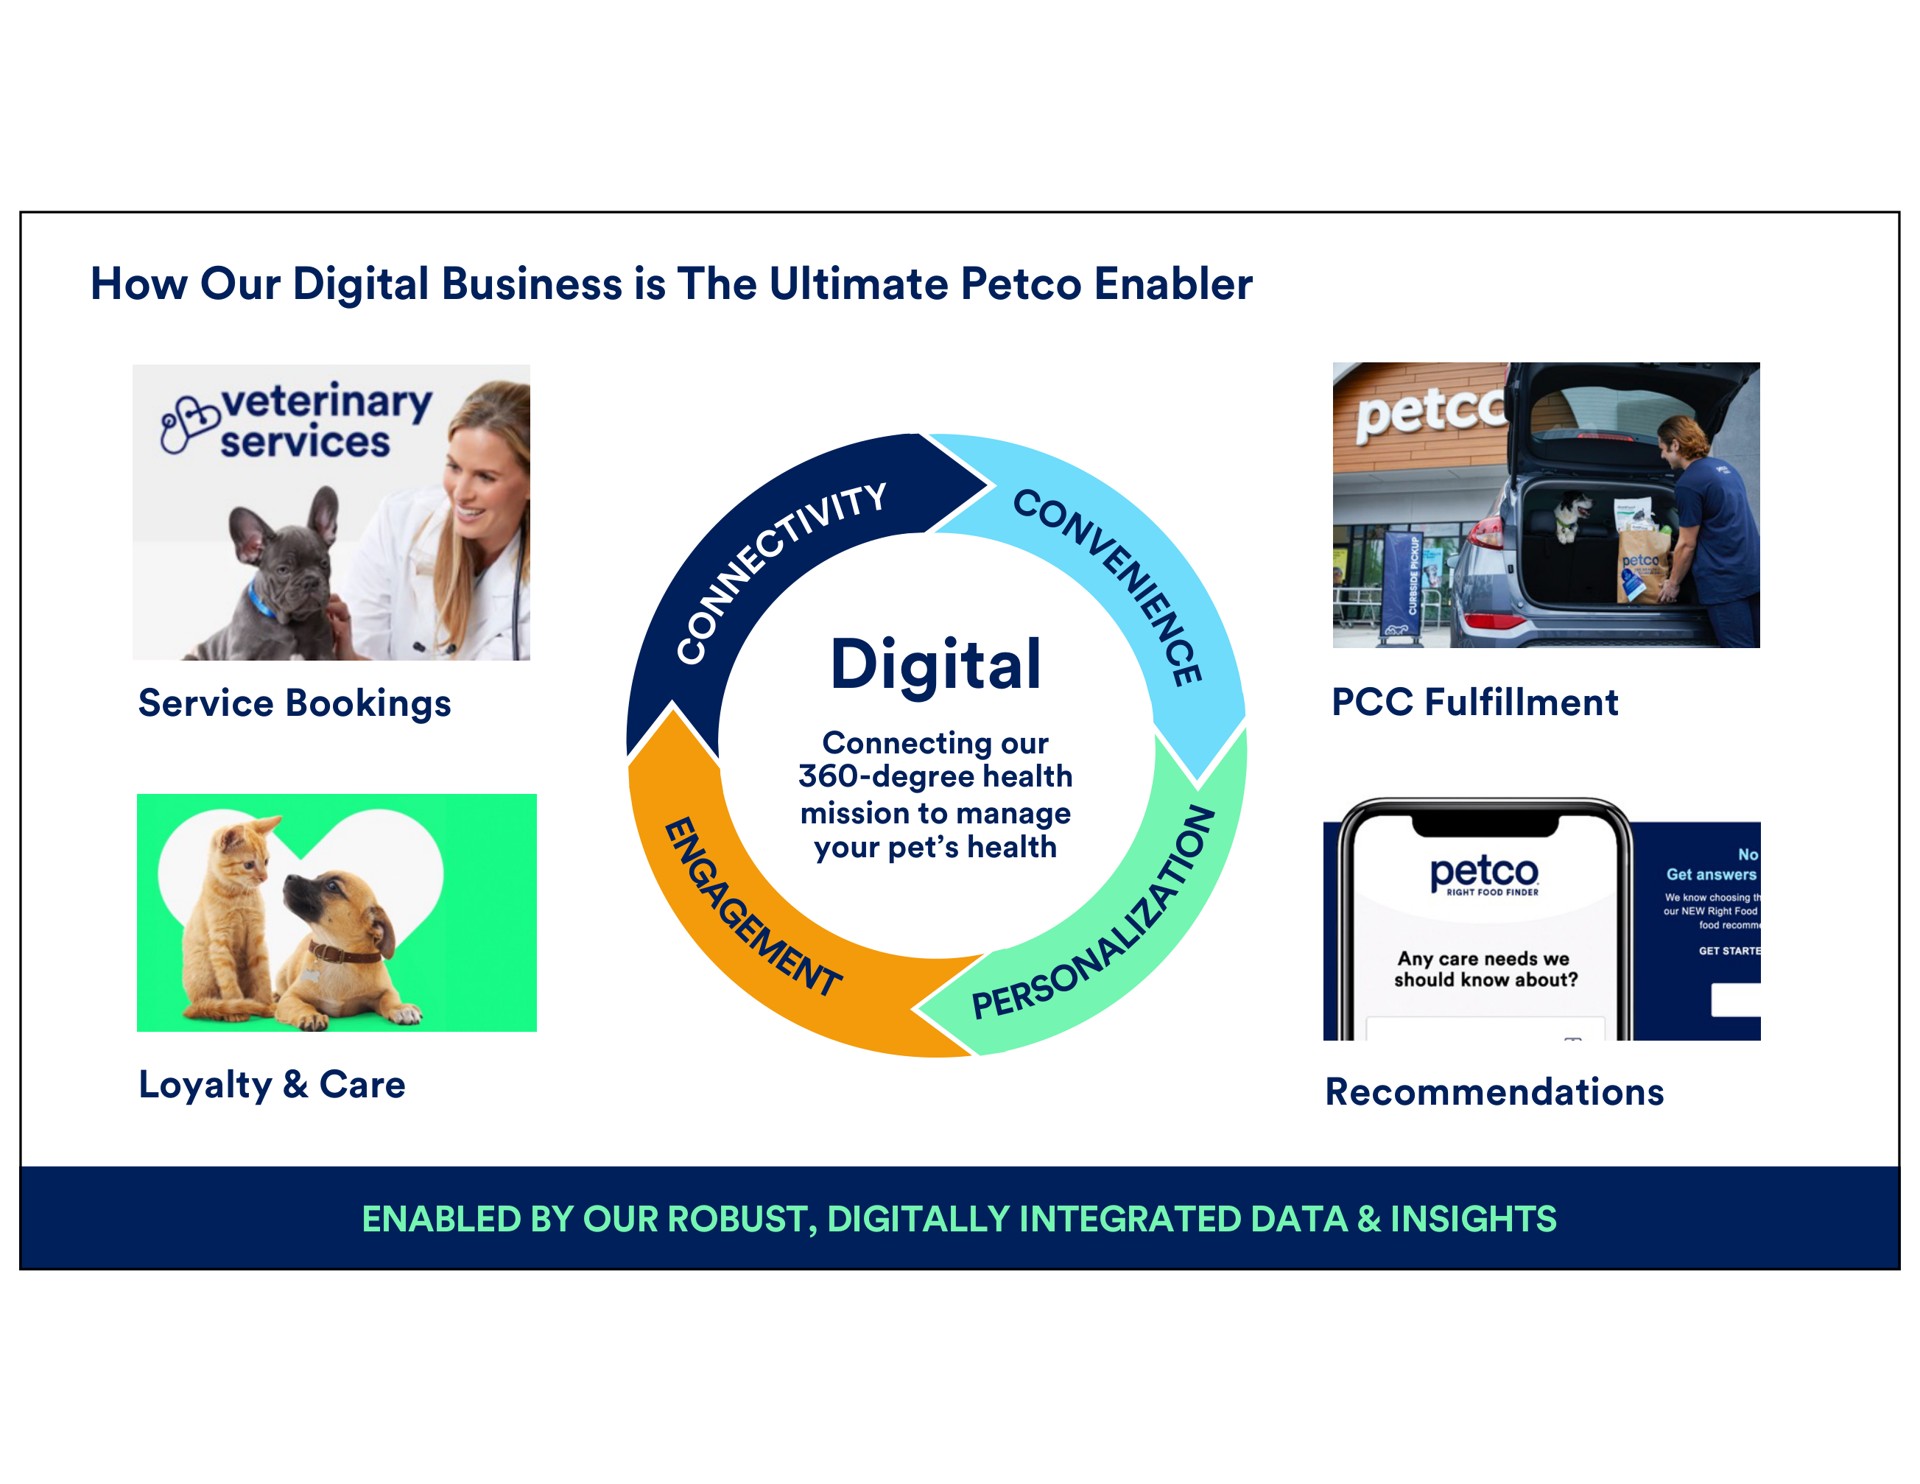 how our digital business is the ultimate enabler digital veterinary services service bookings ean i connecting degree health mission to manage your pet health enabled by robust digitally integrated data insights recommendations know abut loyalty care | Petco